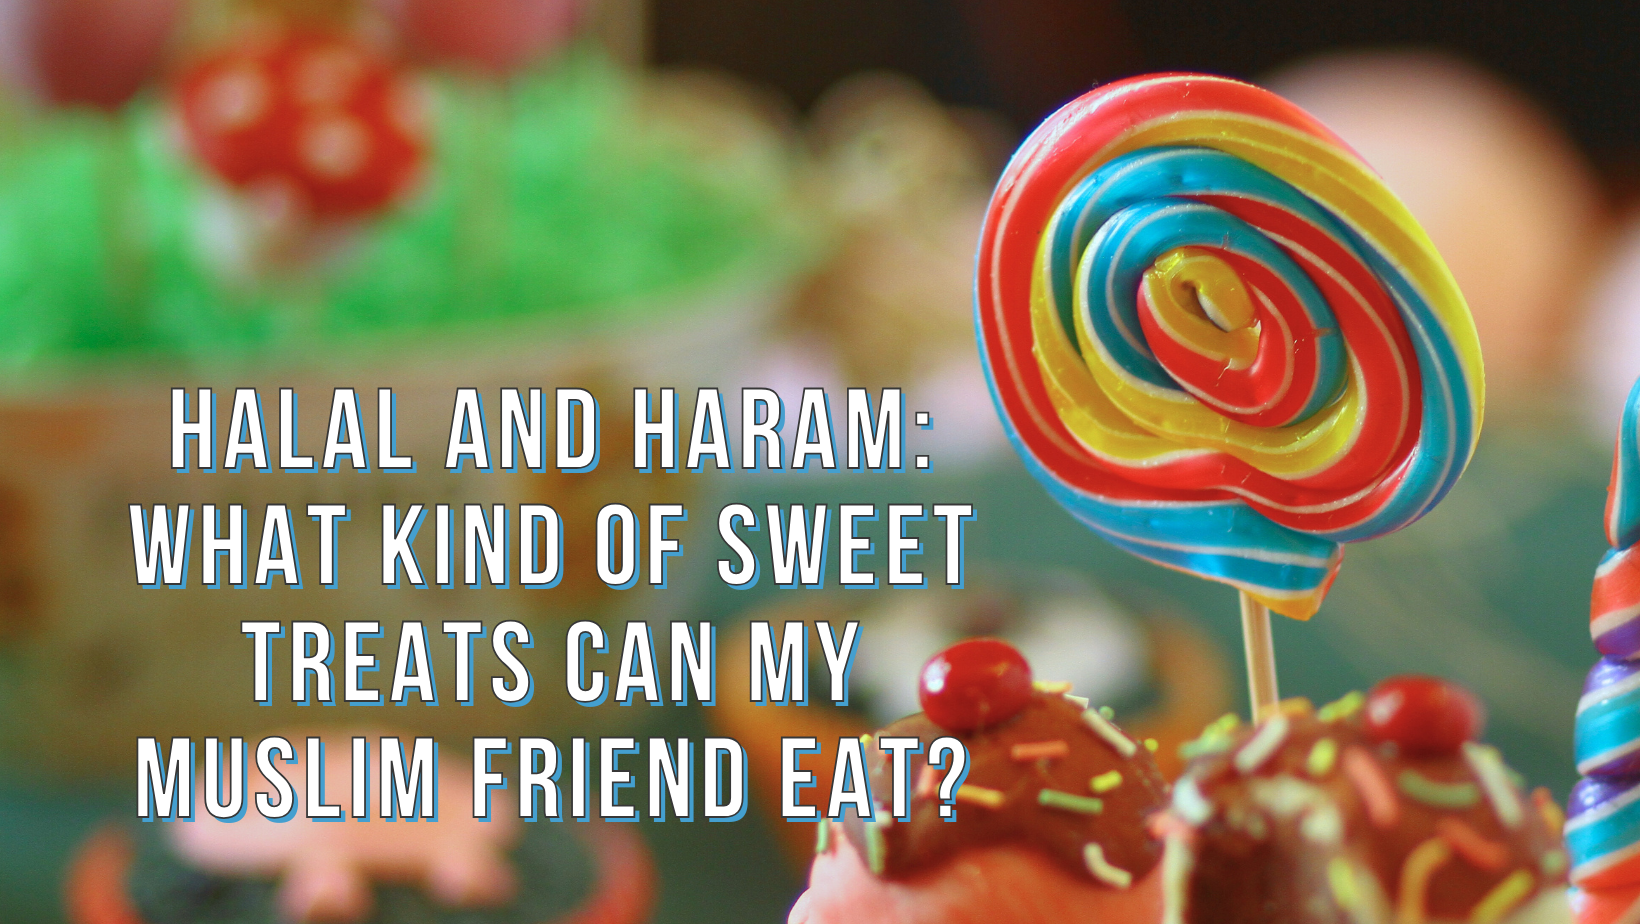 Halal and Haram: What kind of sweet treats can my Muslim friend eat?